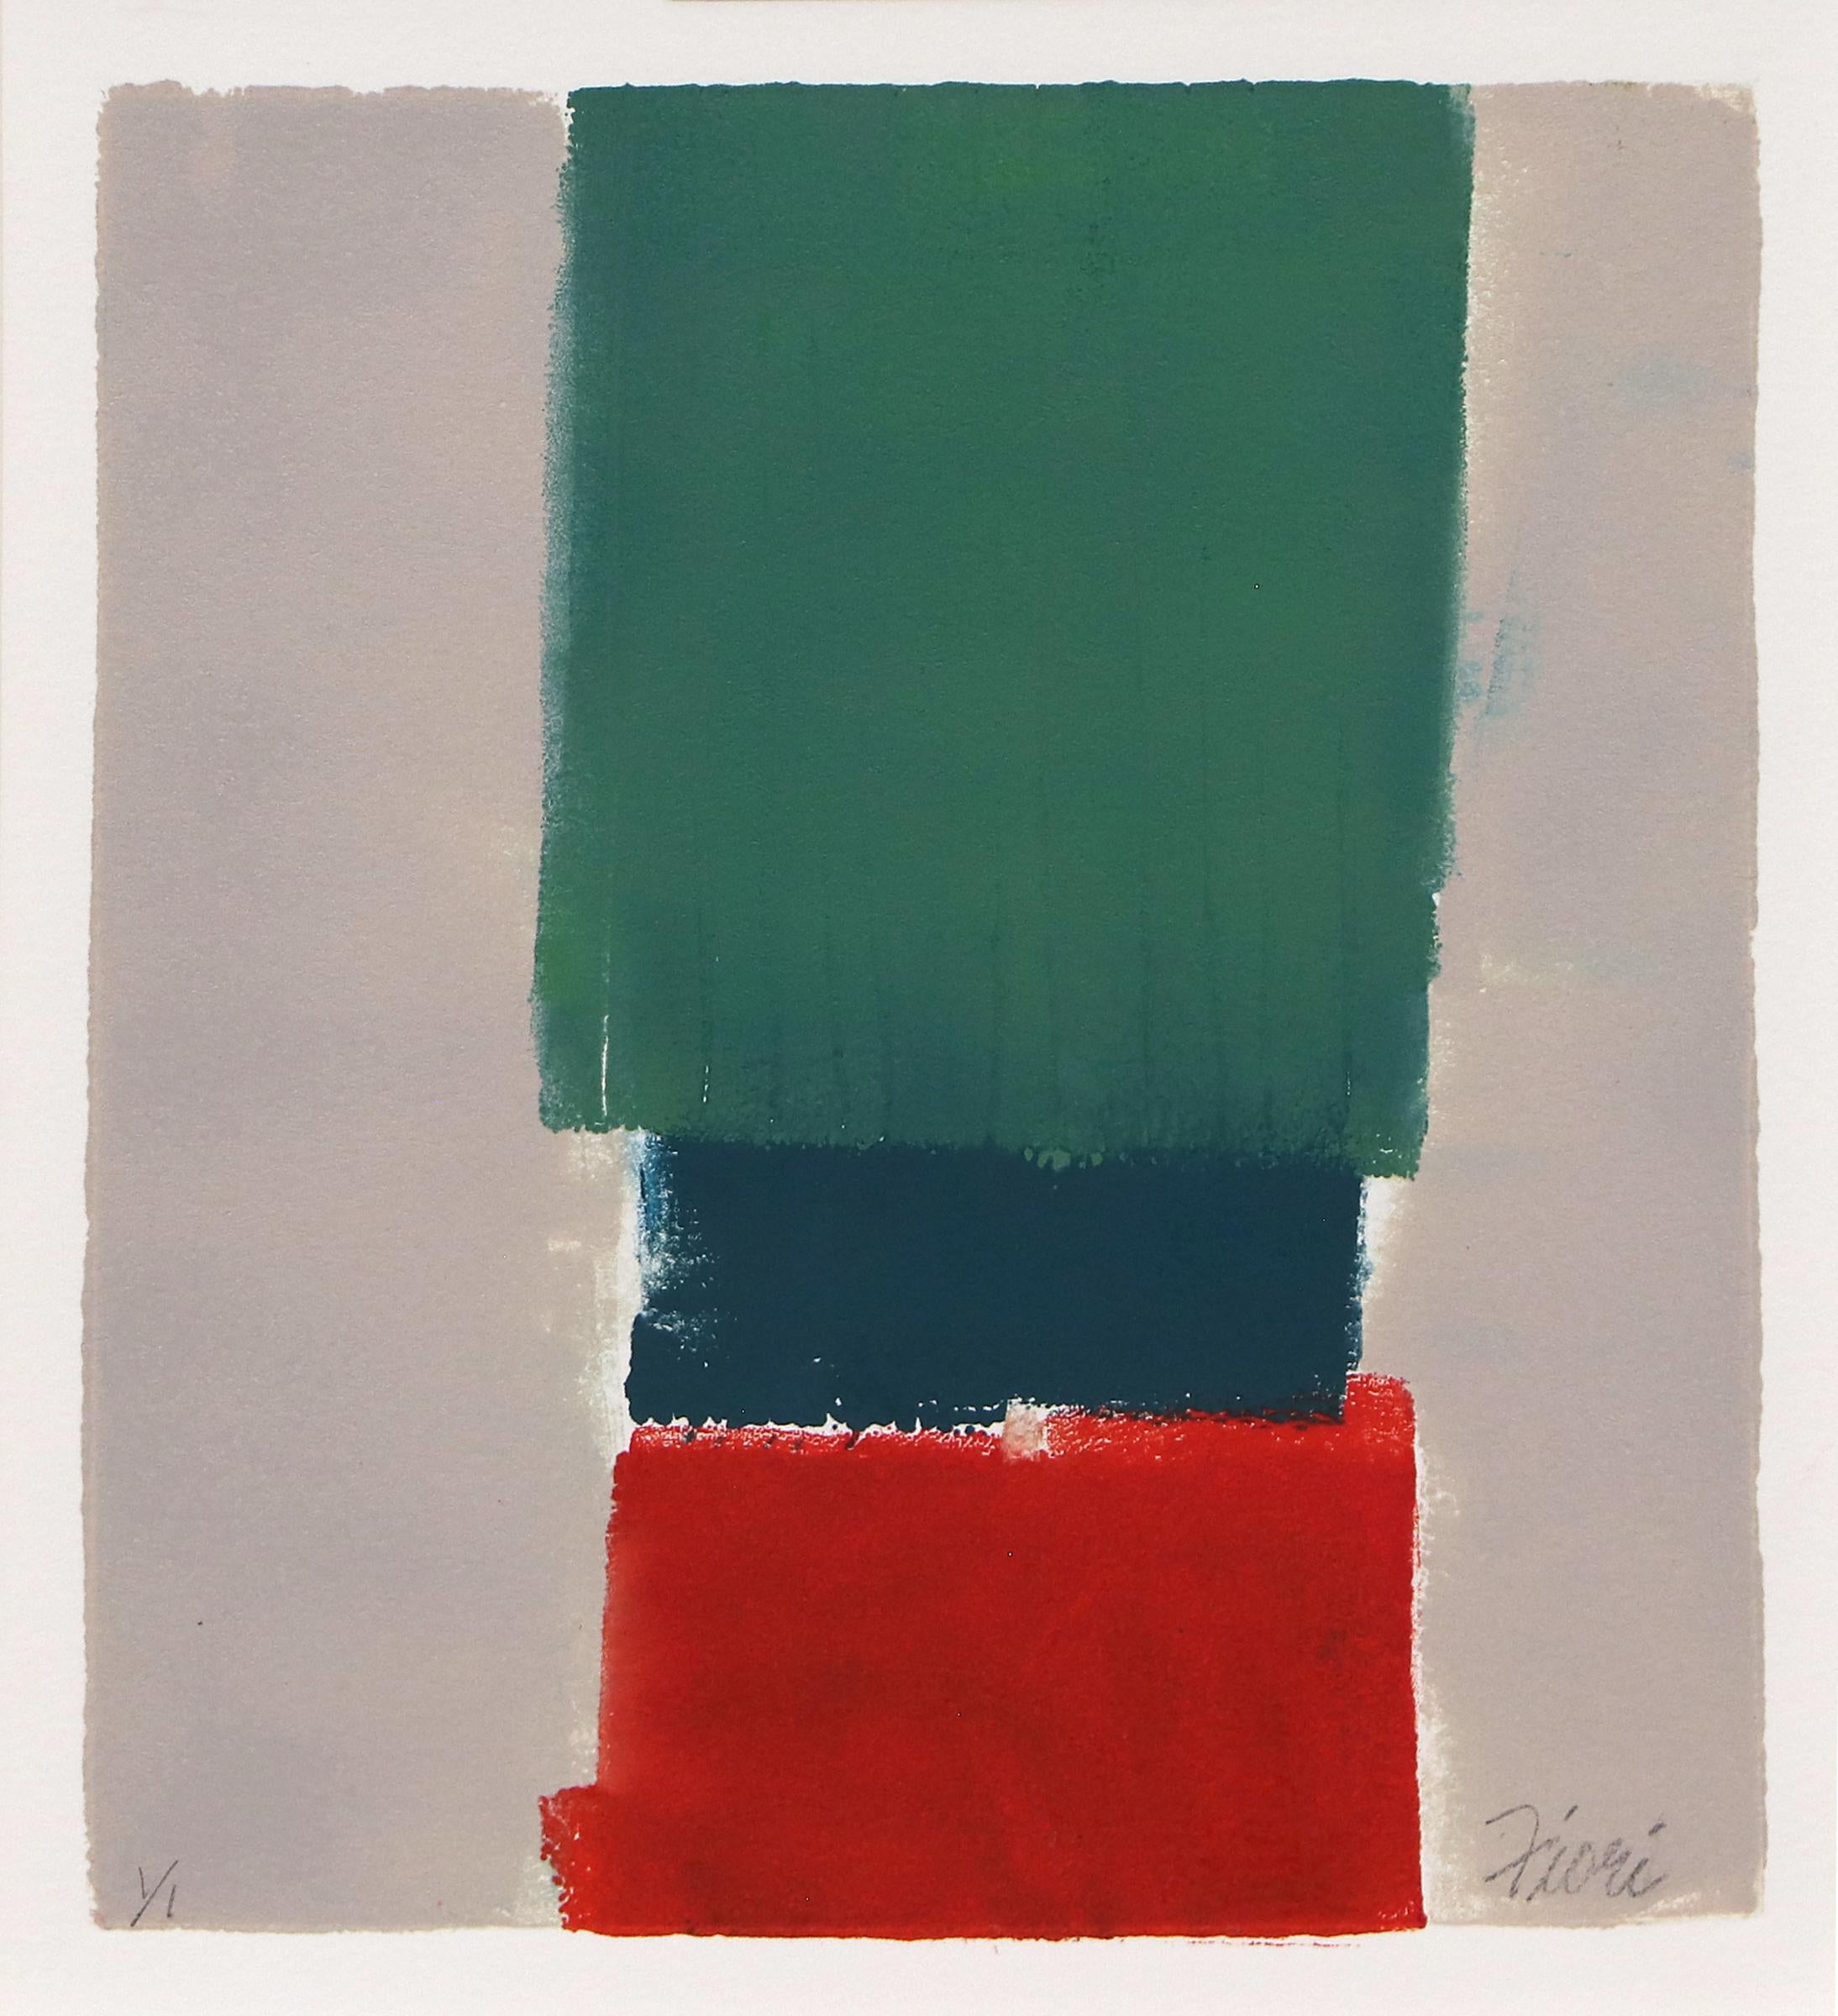 Abstract monotype on paper featuring red, green, and blue rectangles on a gray background by Wilma Fiori (1929-2019). Presented in a custom frame with all archival materials measuring 15 3⁄4 x 14 1⁄2 x 1 inches. Image measures 7 x 6 1⁄2 inches.